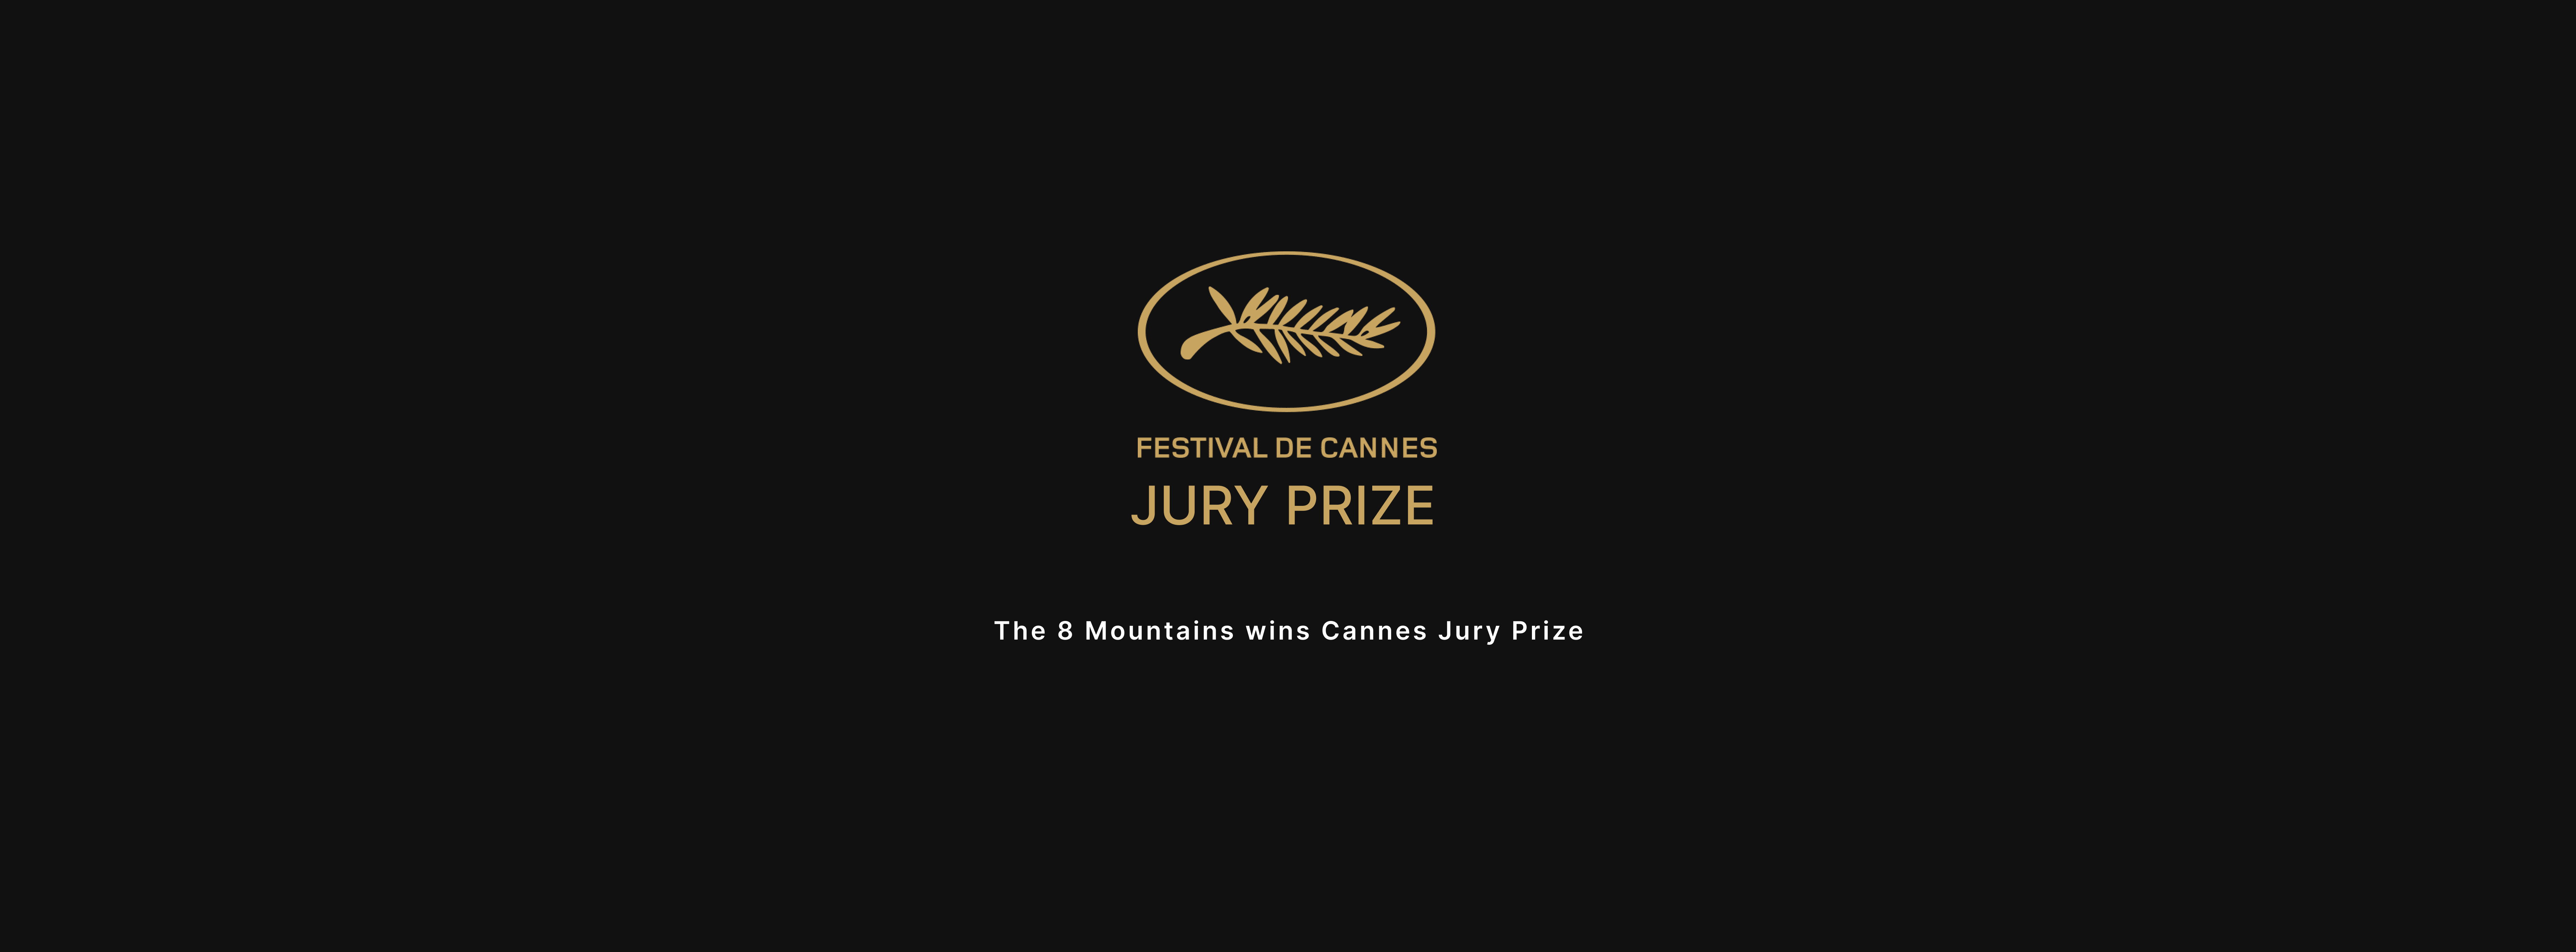 Cannes - The 8 Mountains wins Cannes Jury Prize